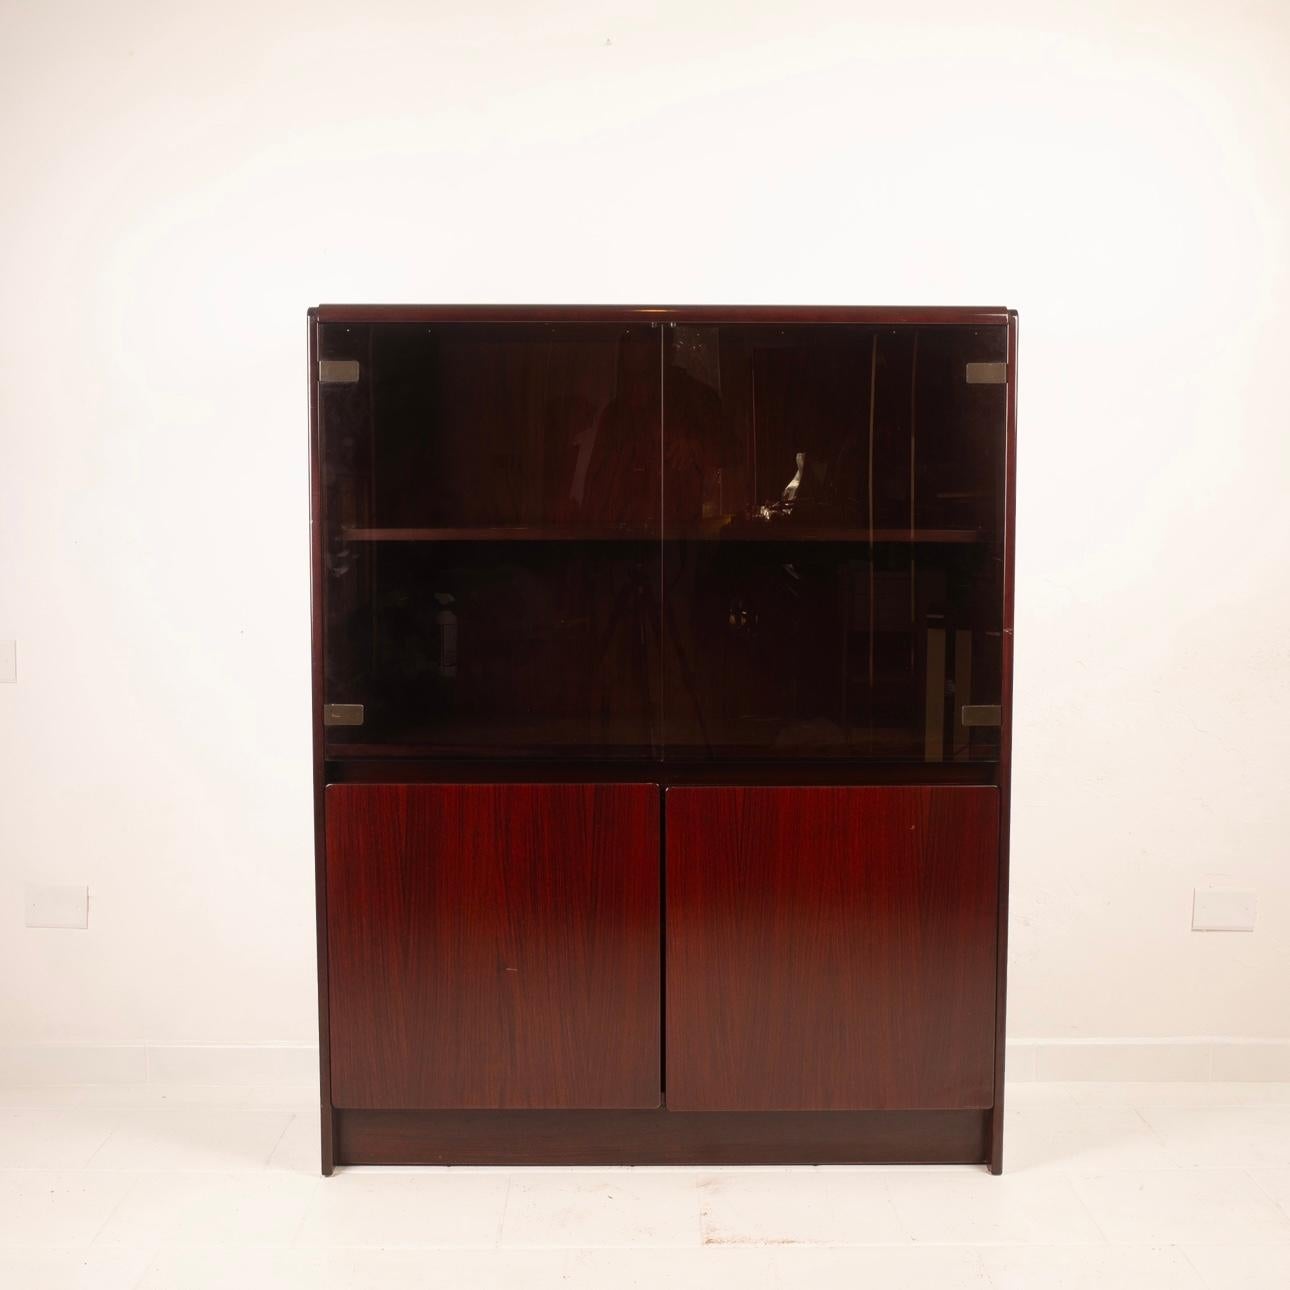 Discover the wonderful cabinet from the 